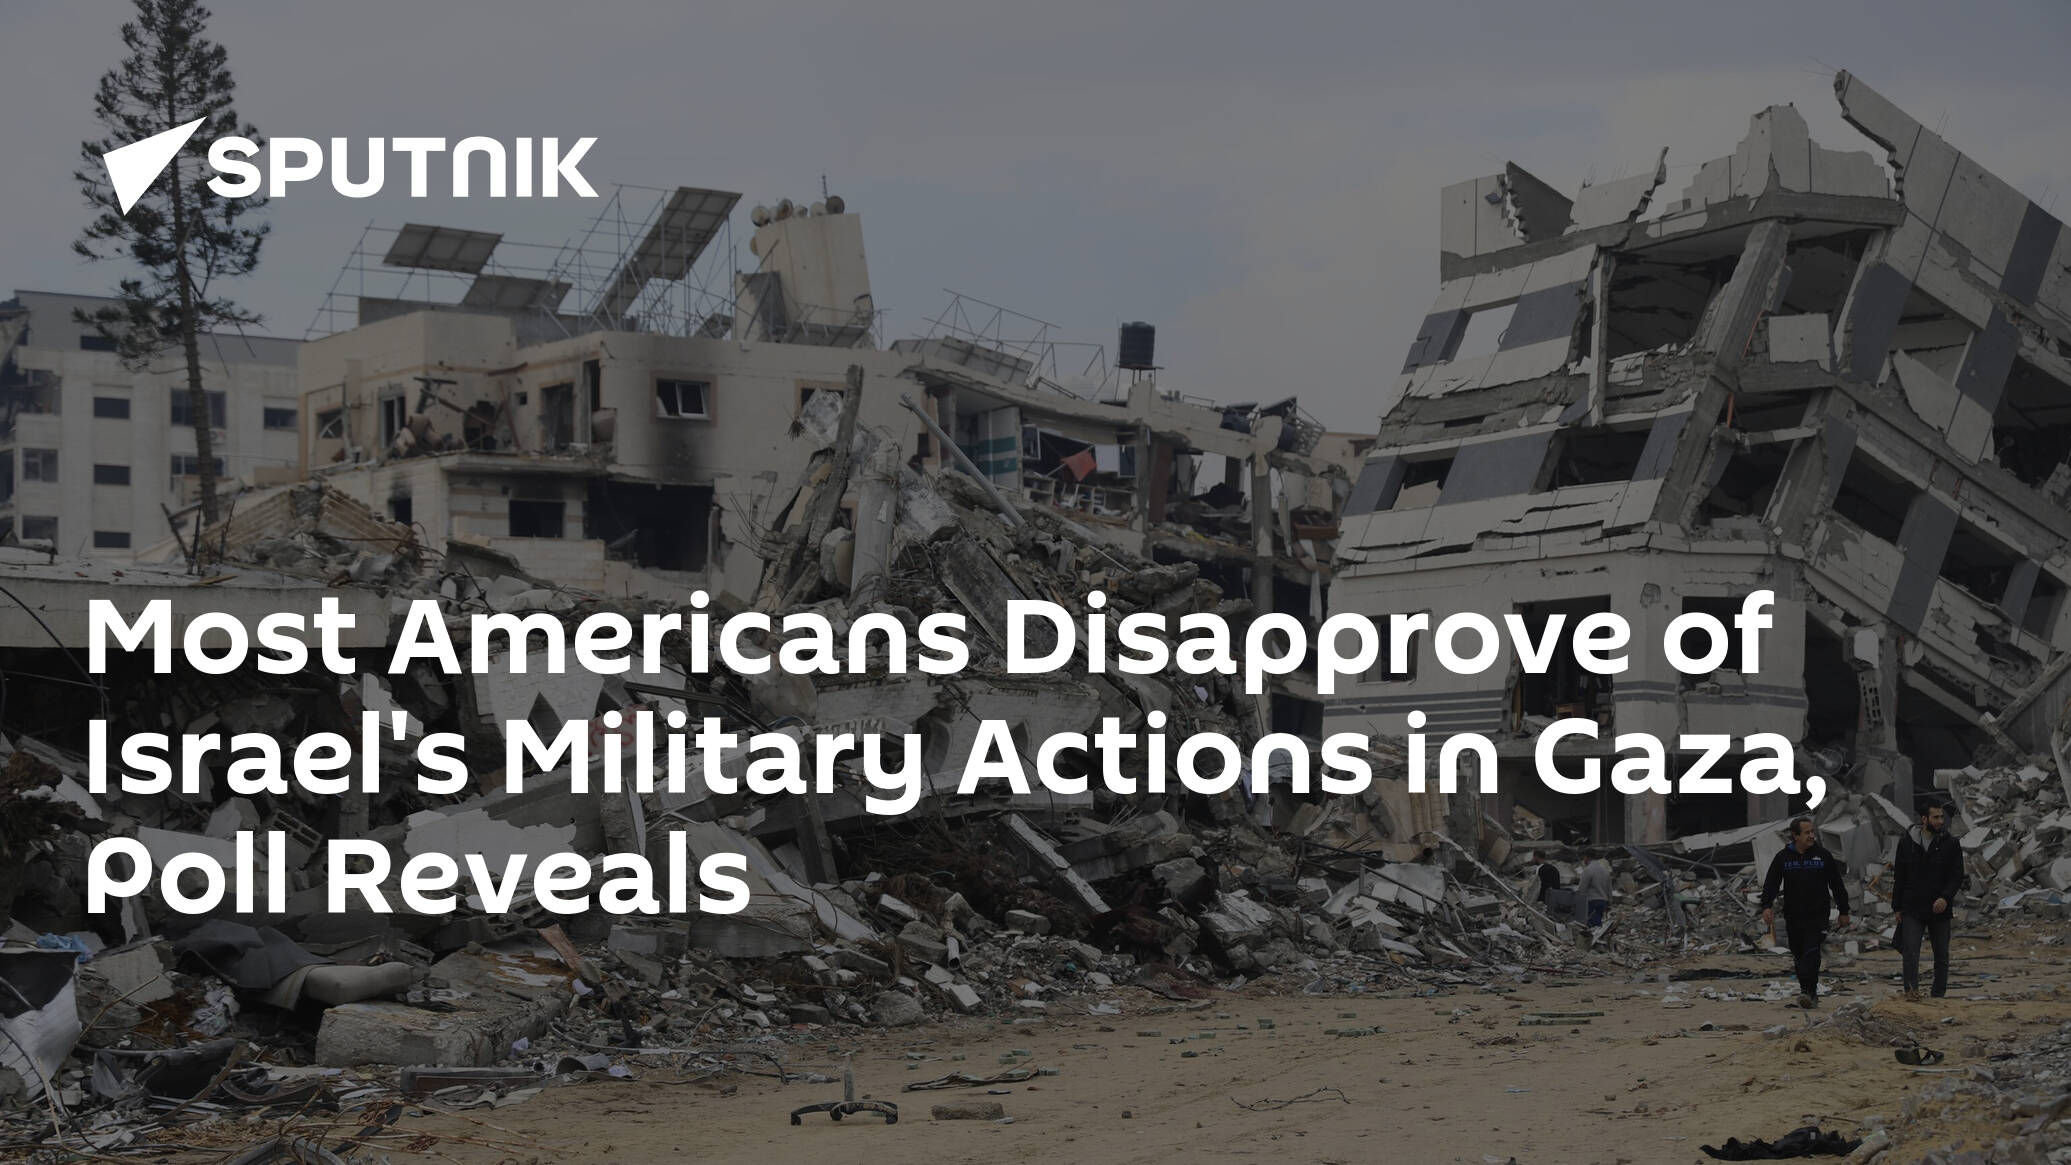 Most Americans Disapprove of Israel's Military Actions in Gaza Poll